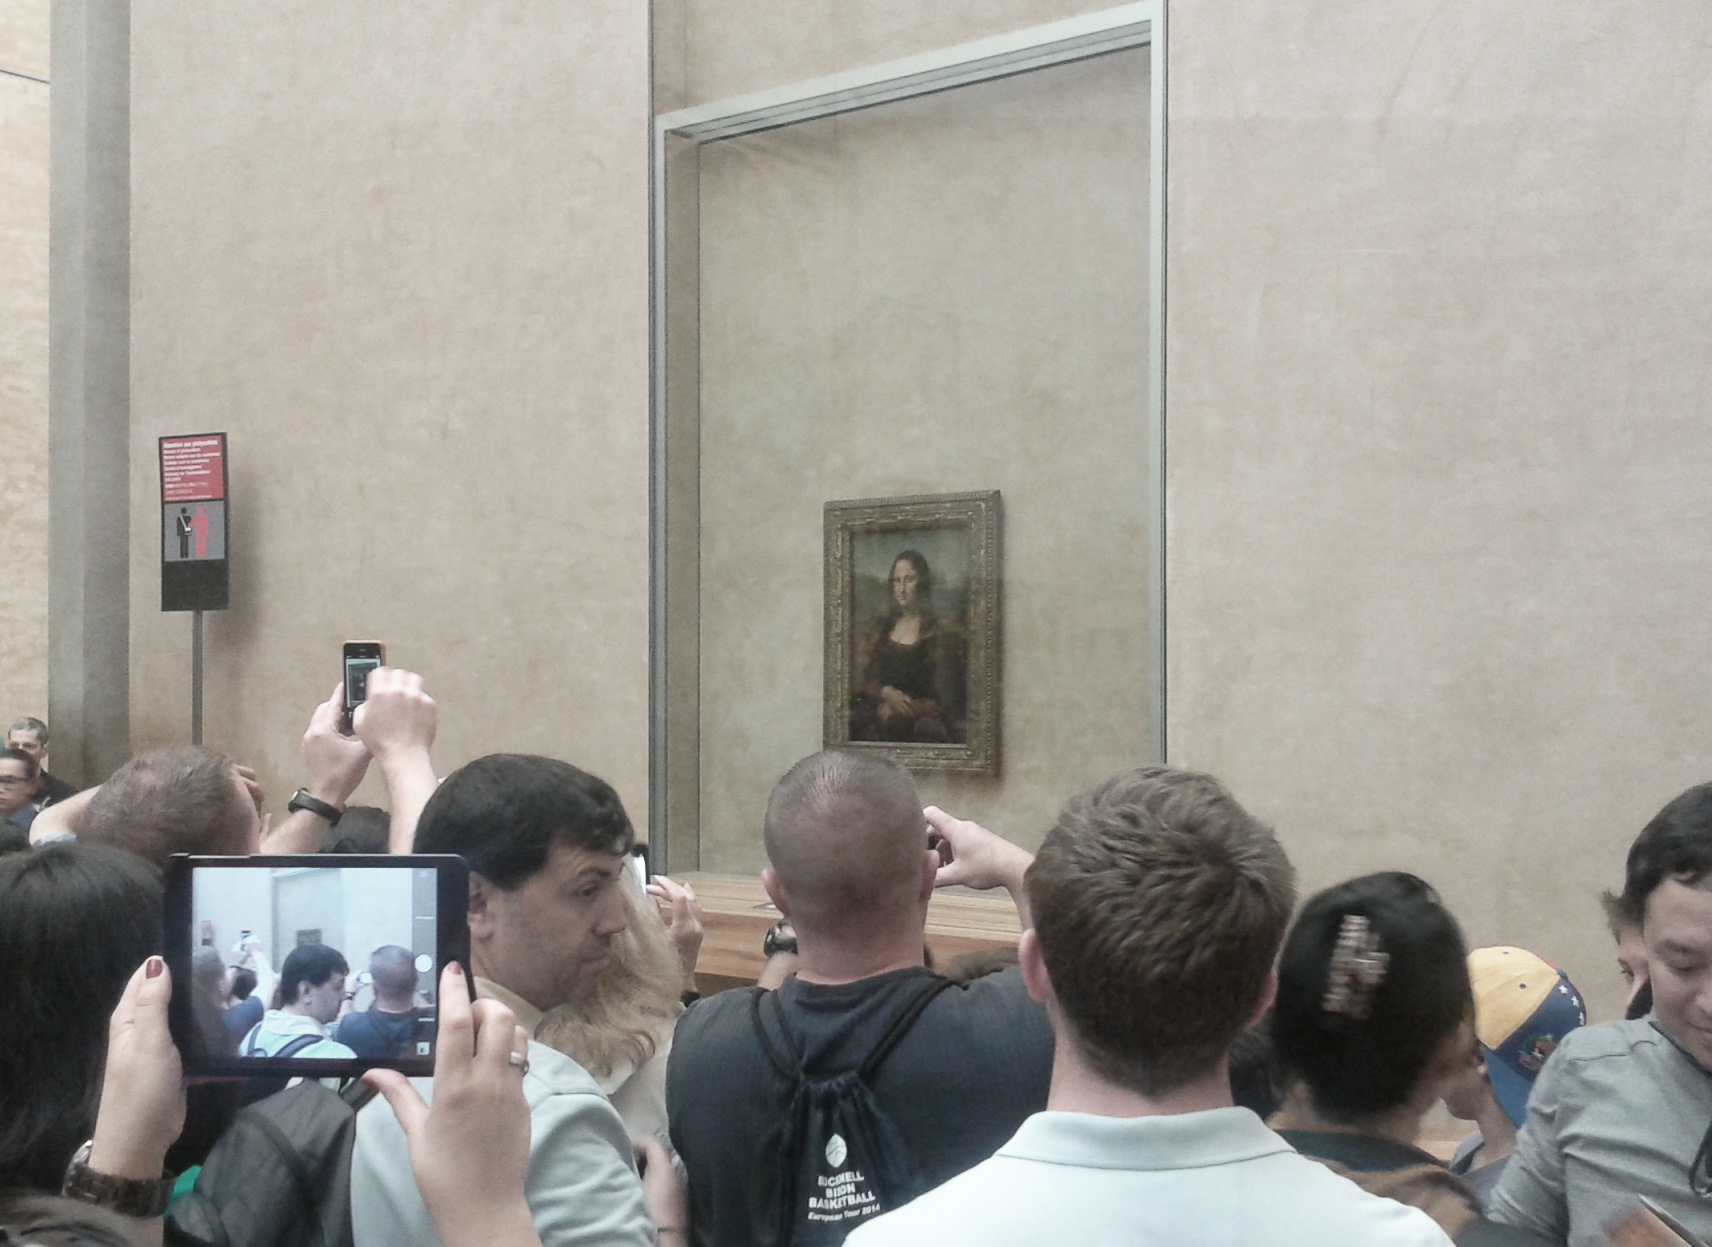 mona-lisa-as-close-you-can-get